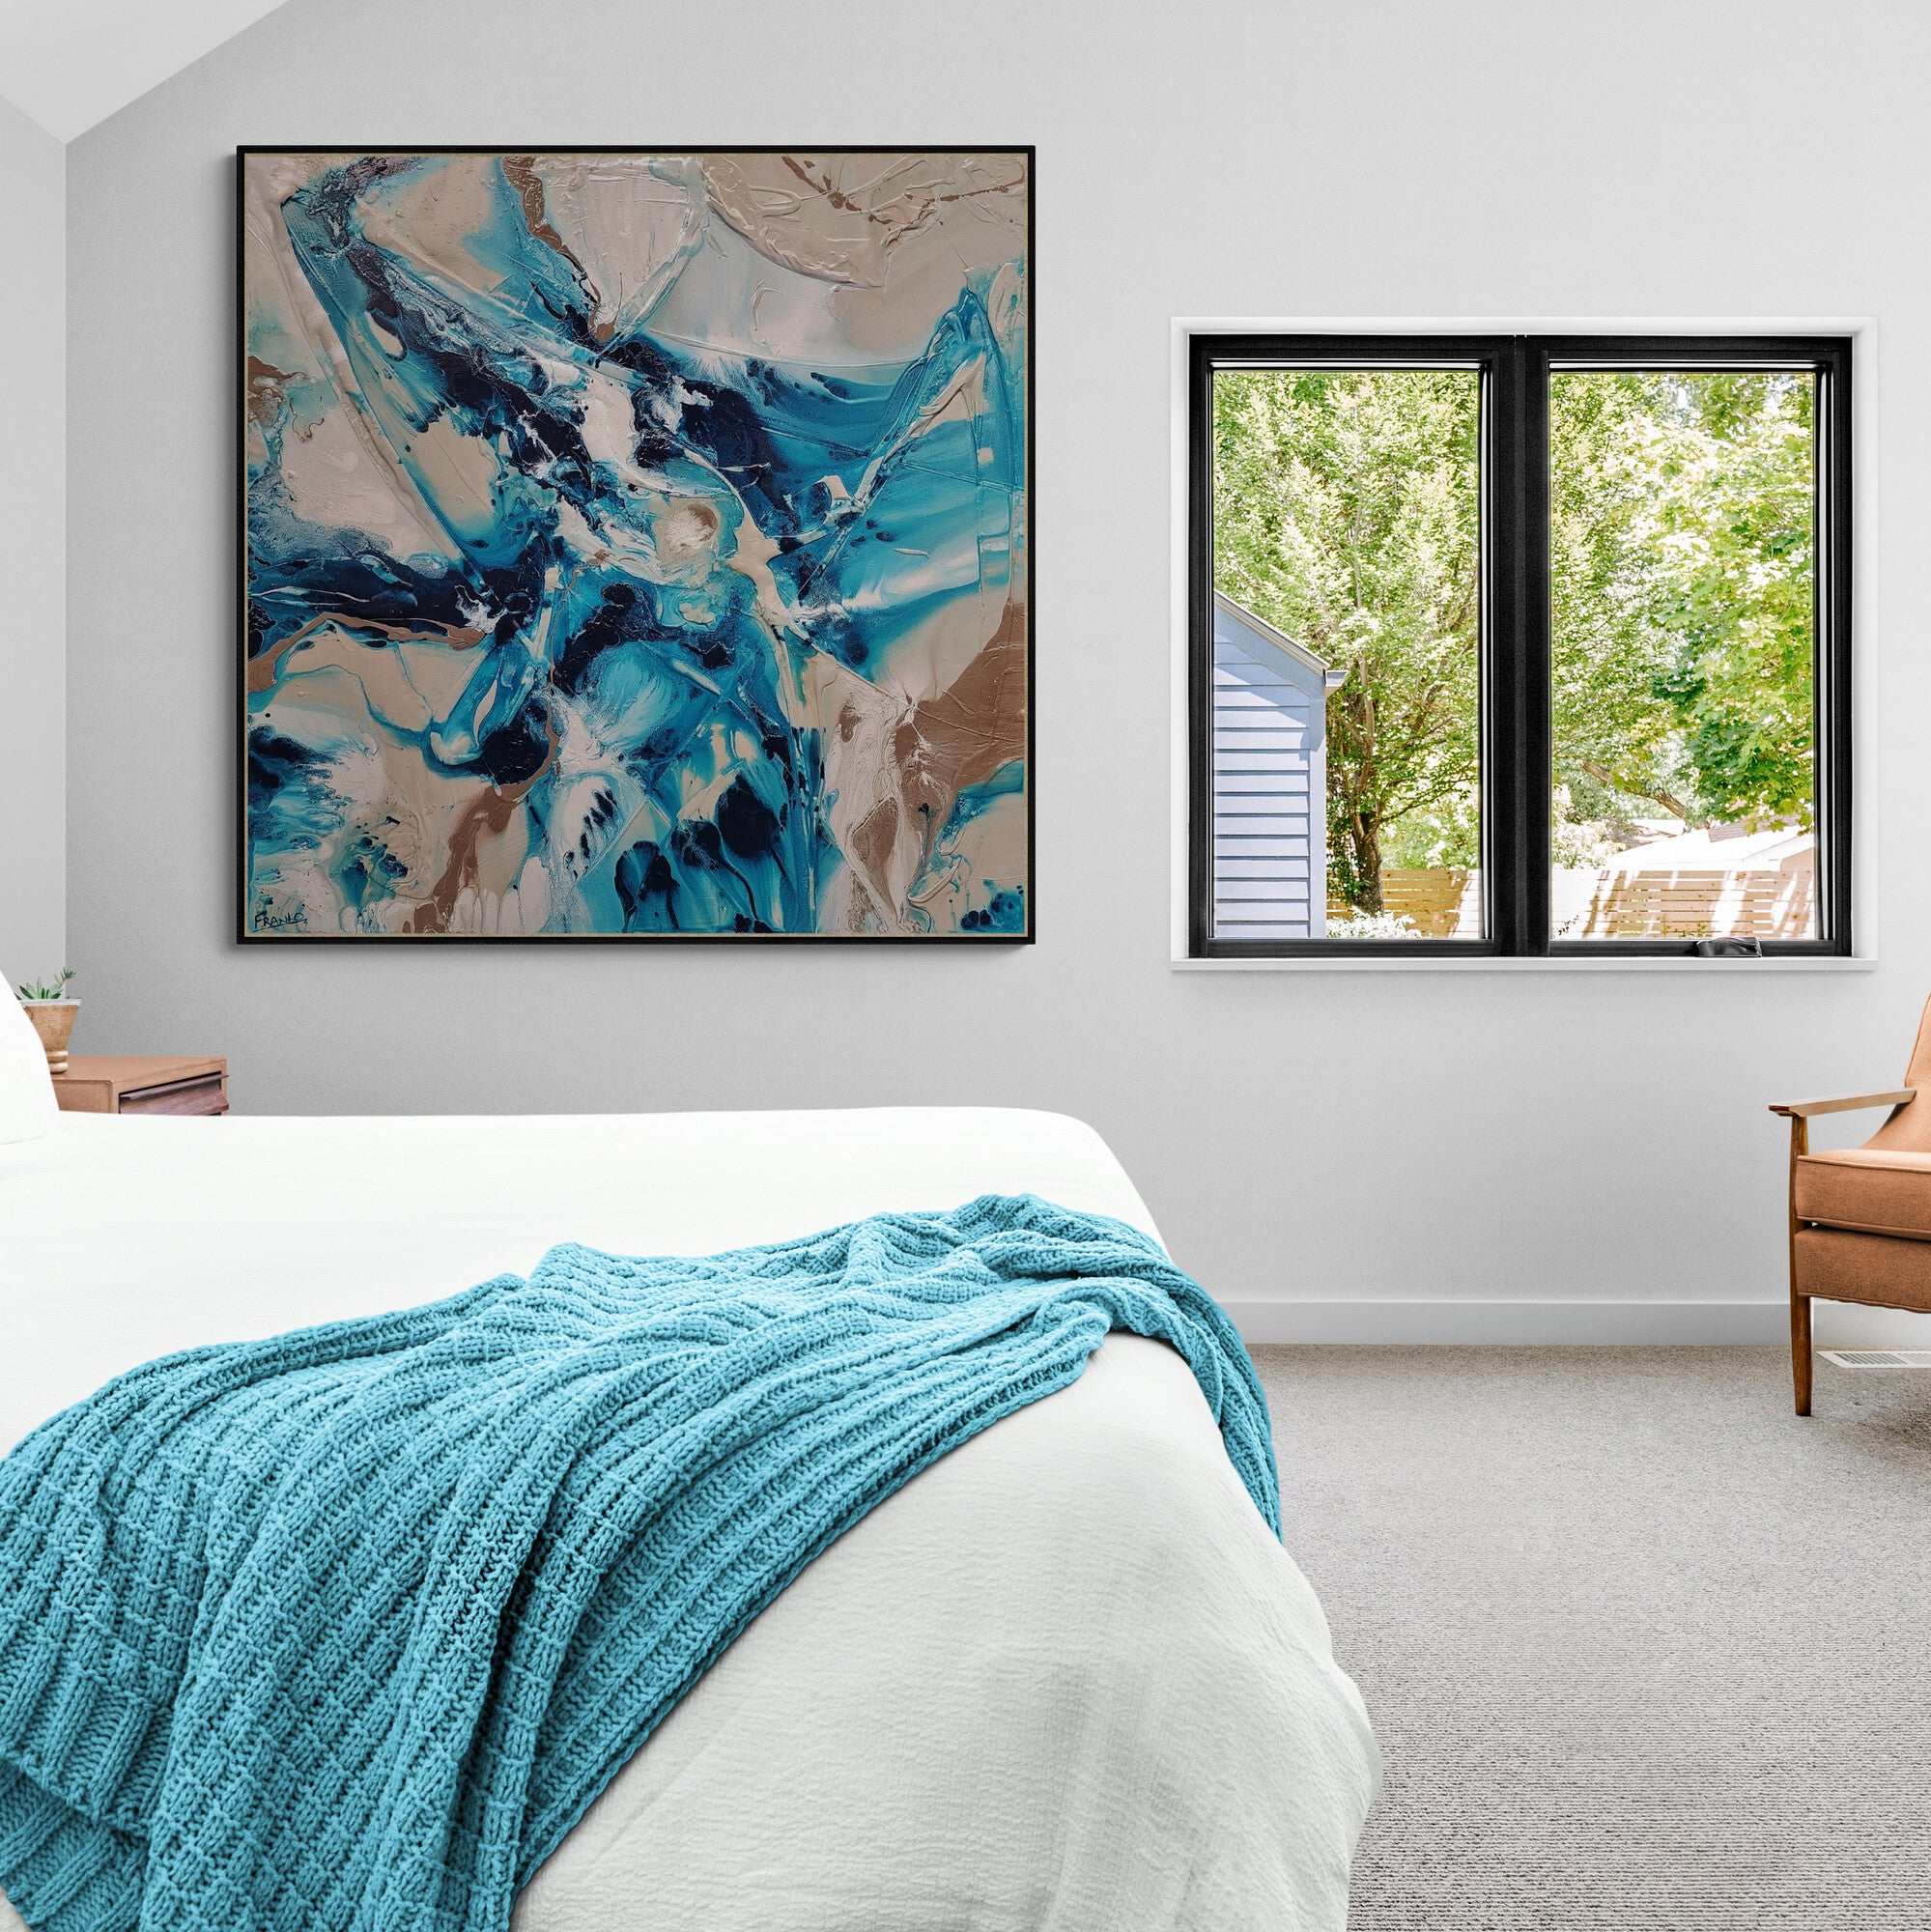 Southern Sugar 120cm x 120cm Turquoise Cream White Textured Abstract Painting